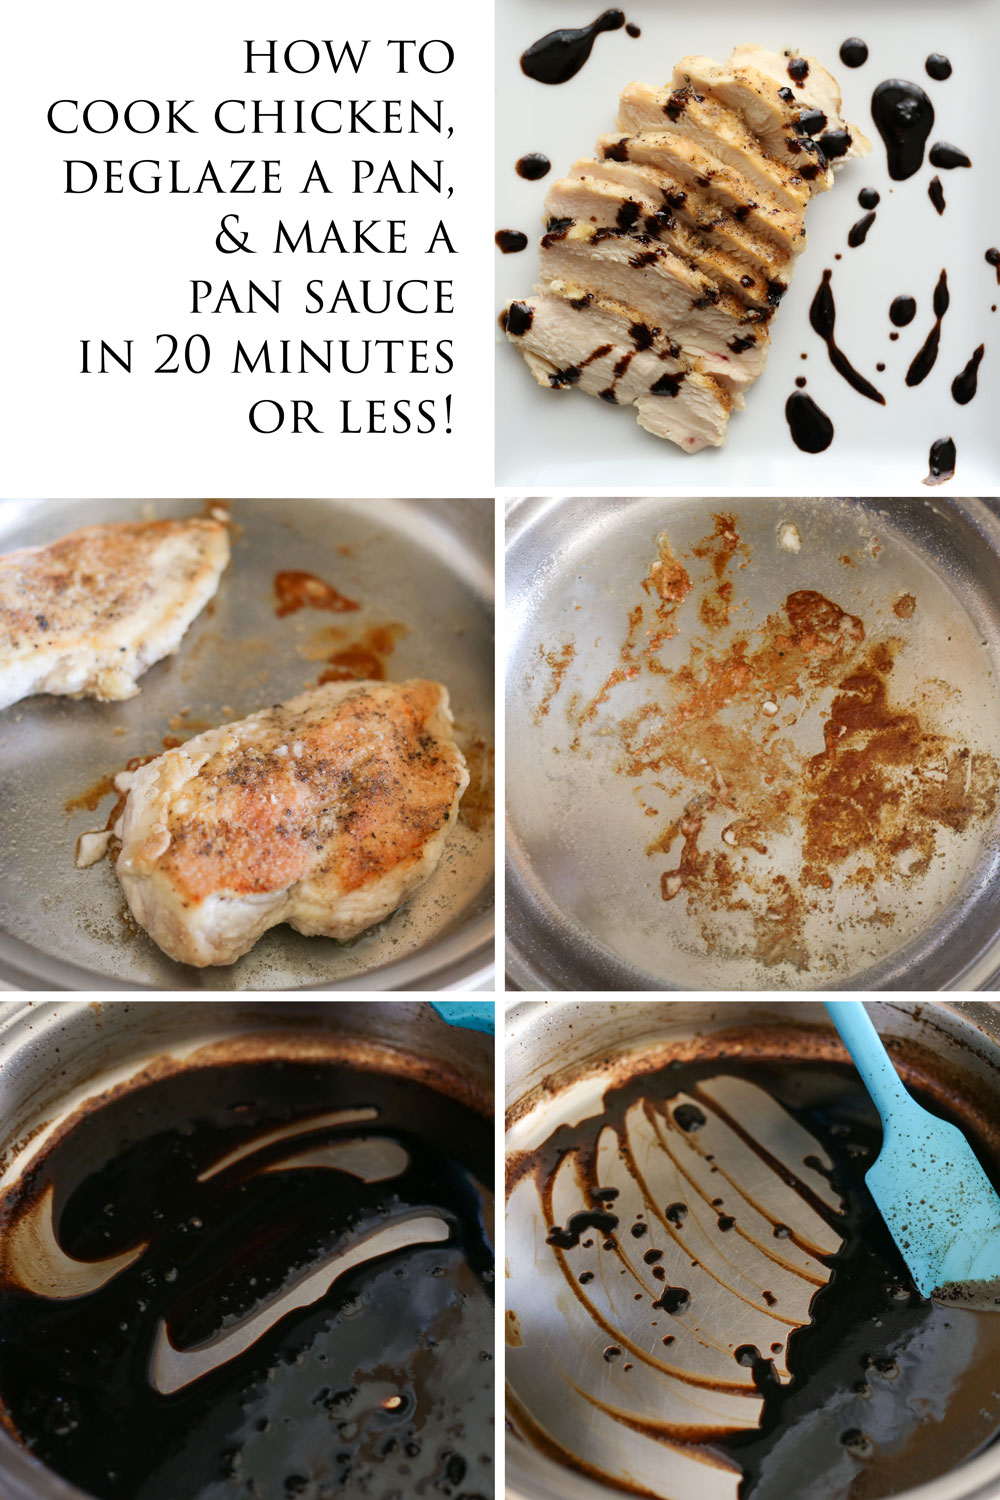 Recipe and tips for how to cook chicken, deglaze a pan, and make a pan sauce in 20 minutes or less!